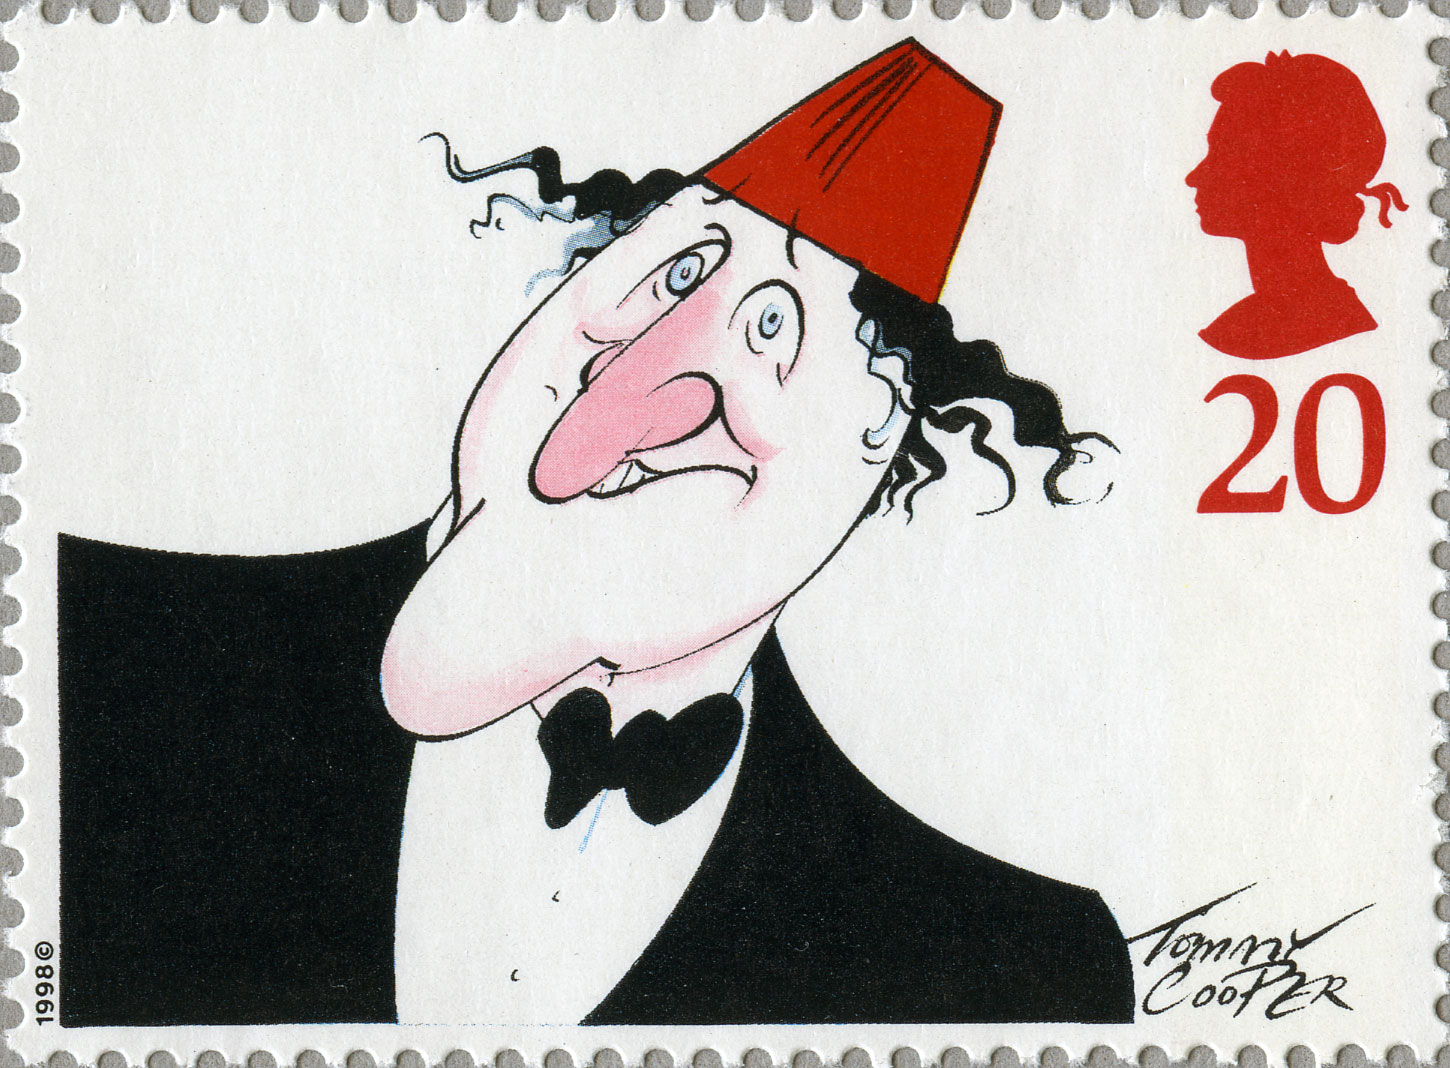 20p, Tommy Cooper